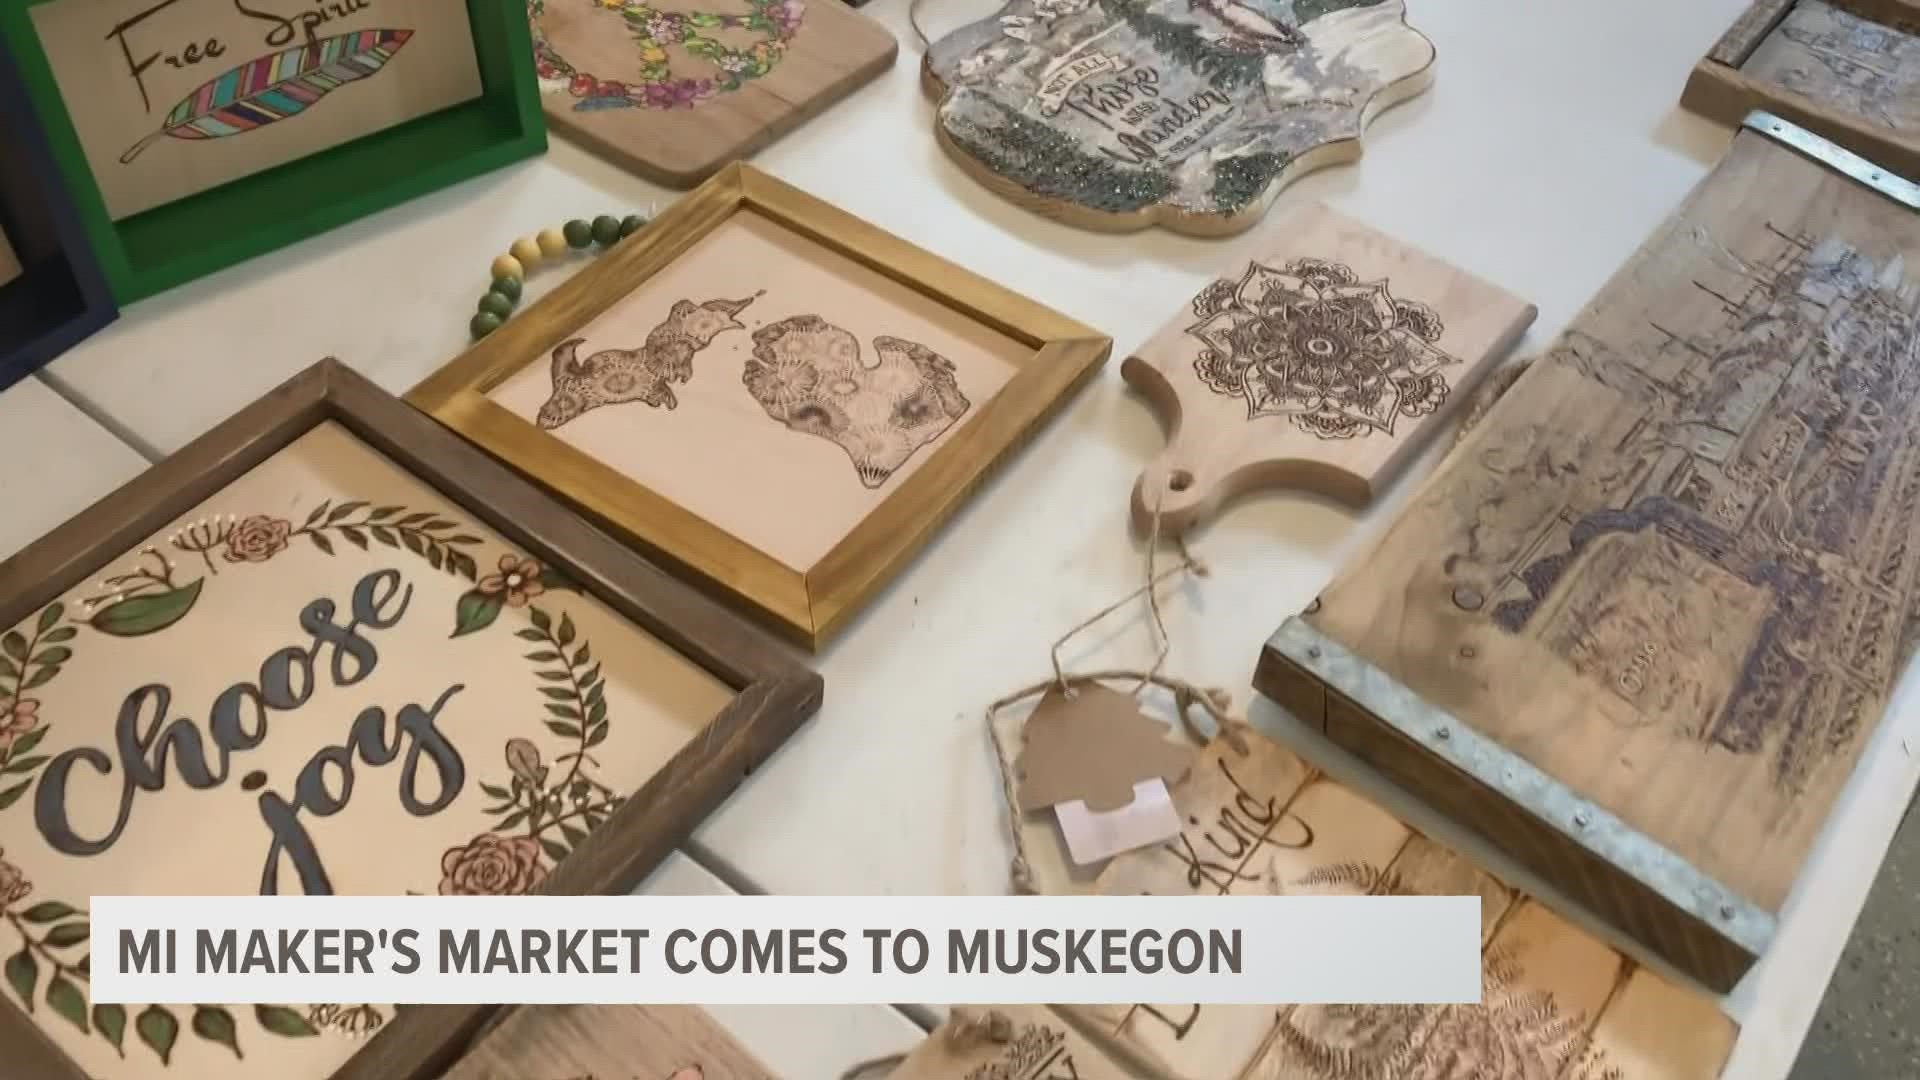 The Michigan Maker's Market will feature nearly 100 local artists and crafters during Saturday's show.